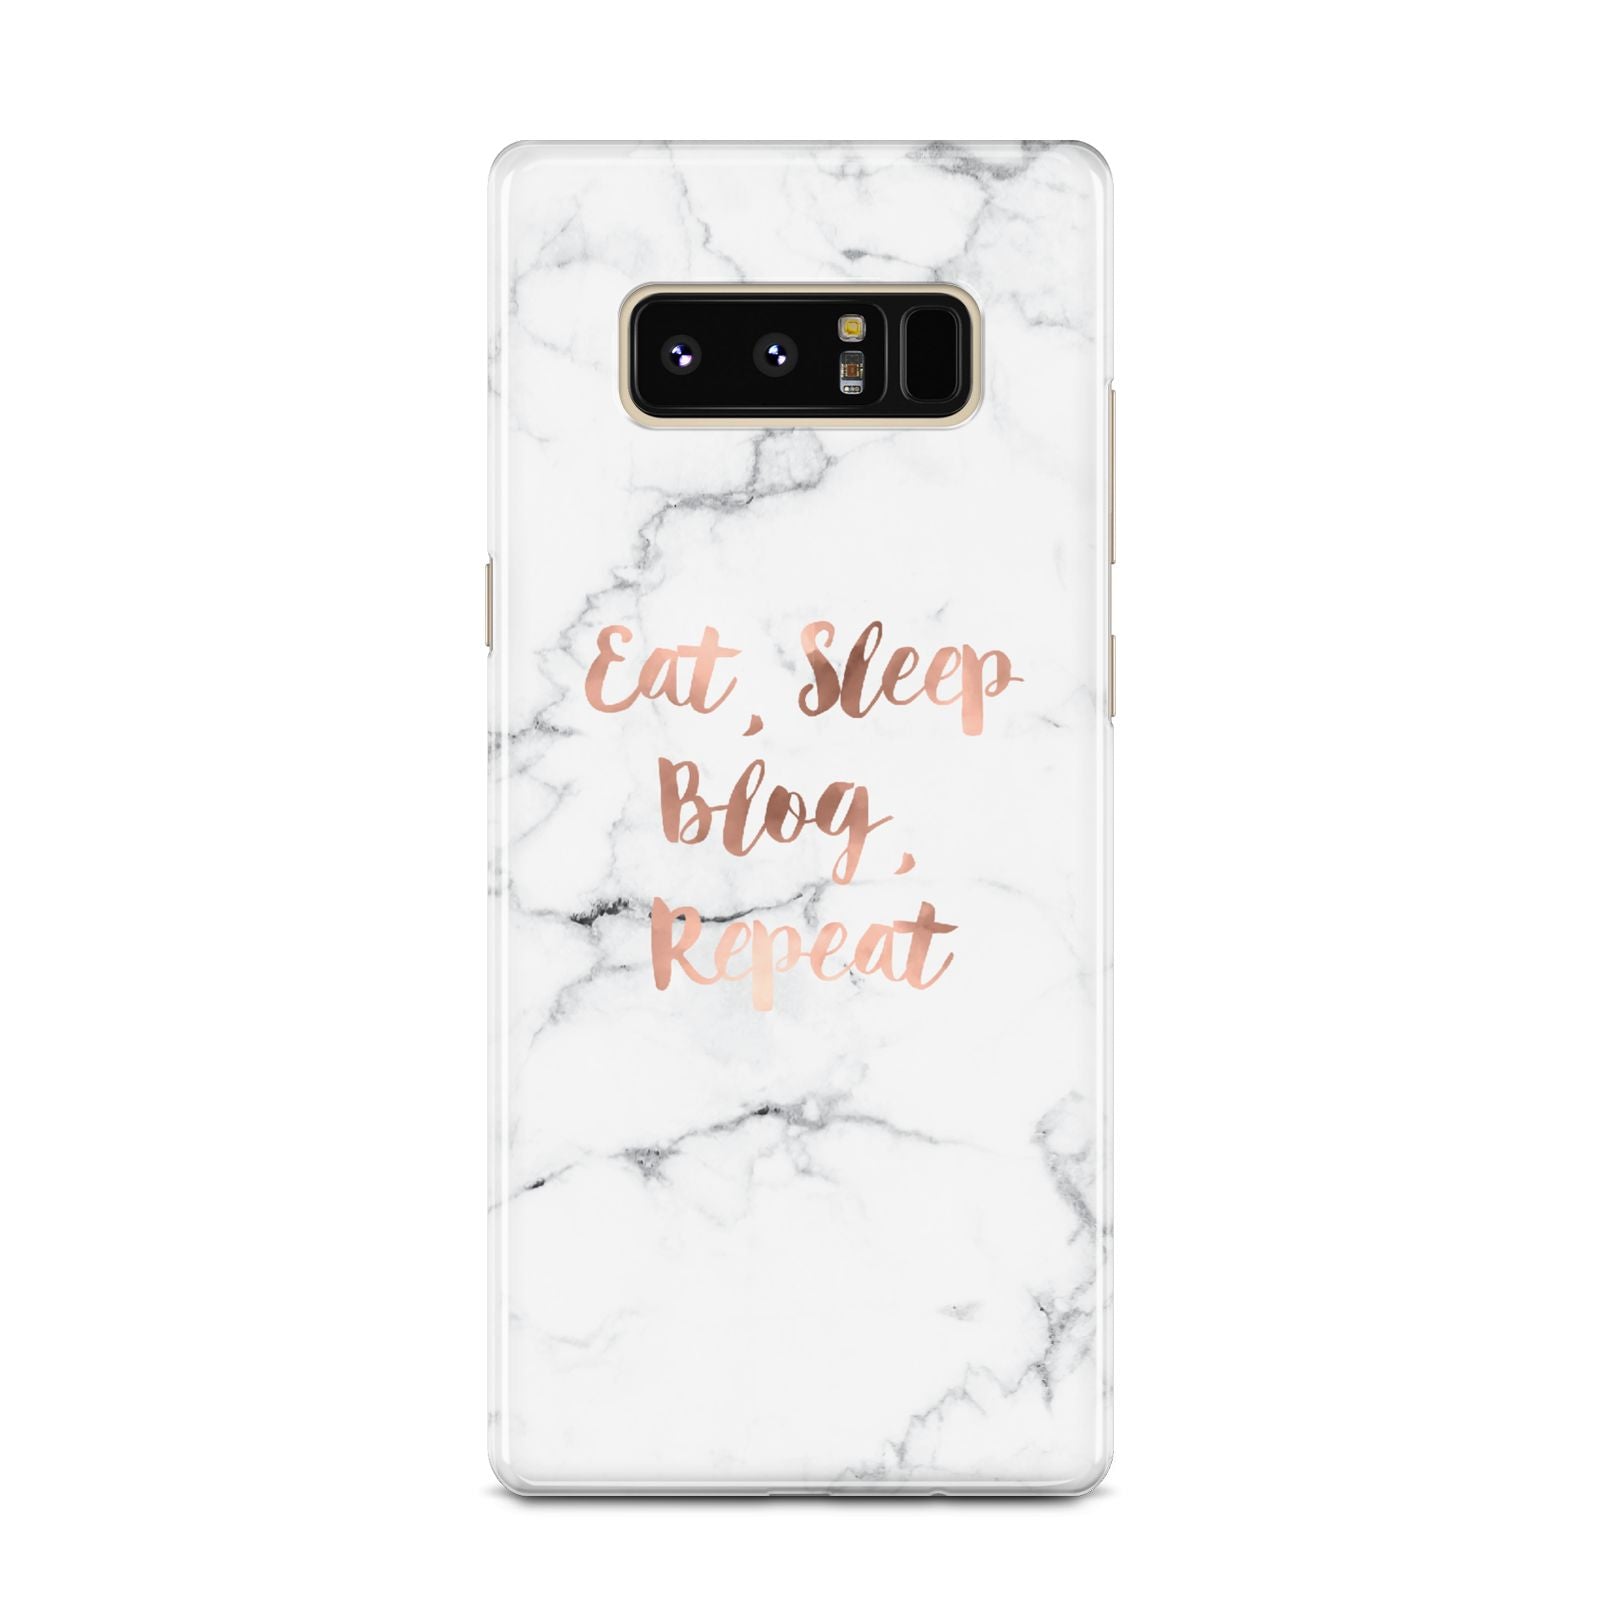 Eat Sleep Blog Repeat Marble Effect Samsung Galaxy Note 8 Case